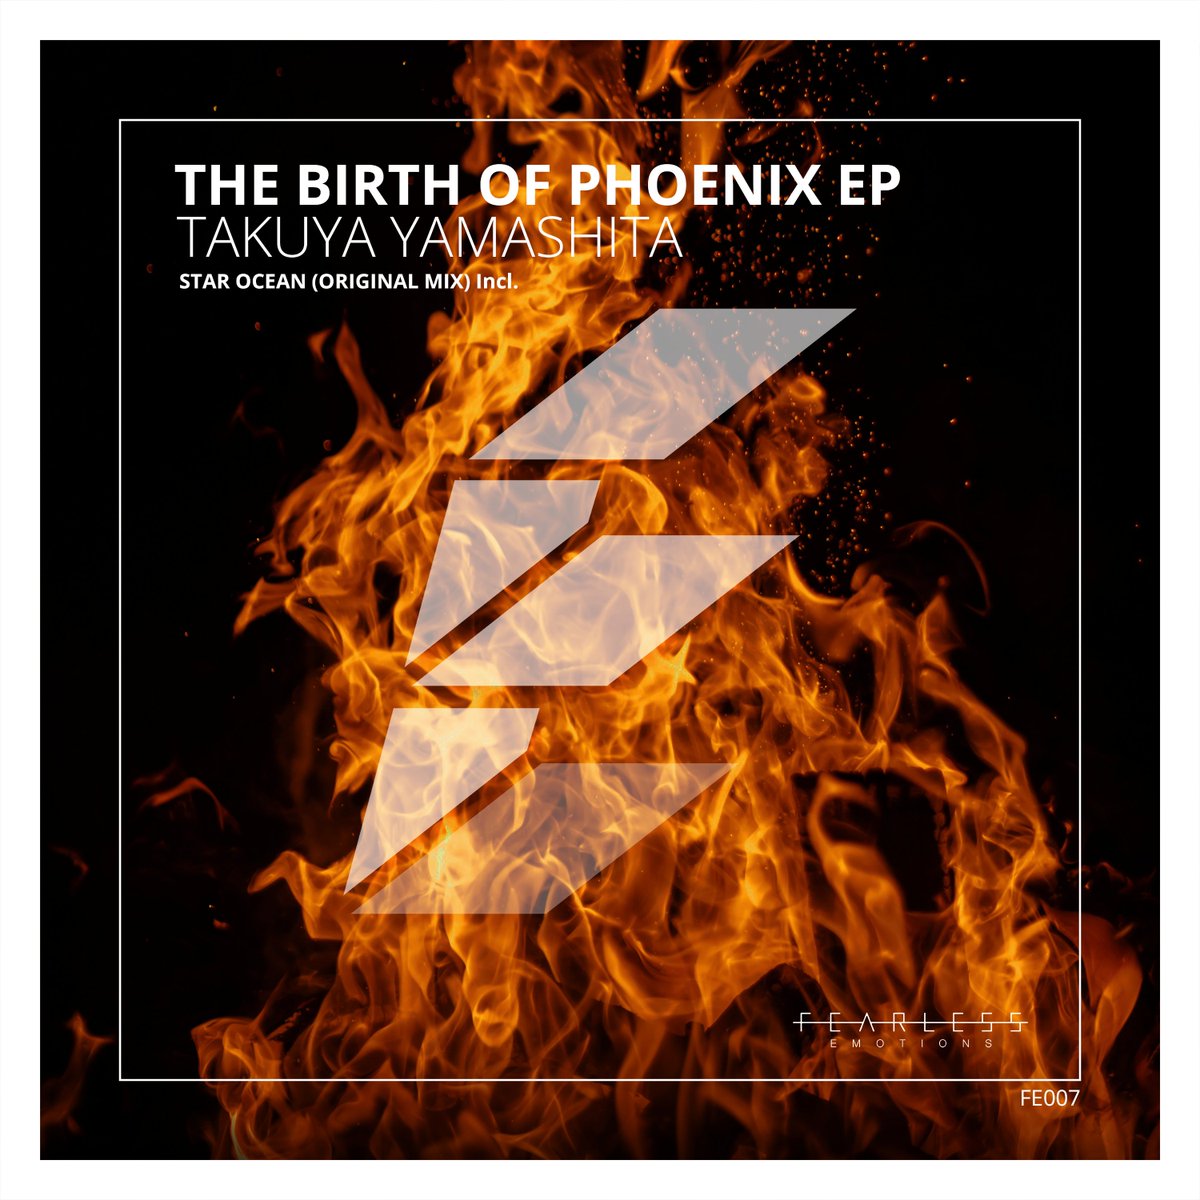 Available now on junodownload and Spotify!!
'The Birth of Phoenix'
Star Ocean (Original Mix) Incl.
Artist: Takuya Yamashita
junodownload
junodownload.com/products/takuy…
Spotify
open.spotify.com/intl-ja/album/…
@T_Yamashita_ @junodownload @SpotifyJP